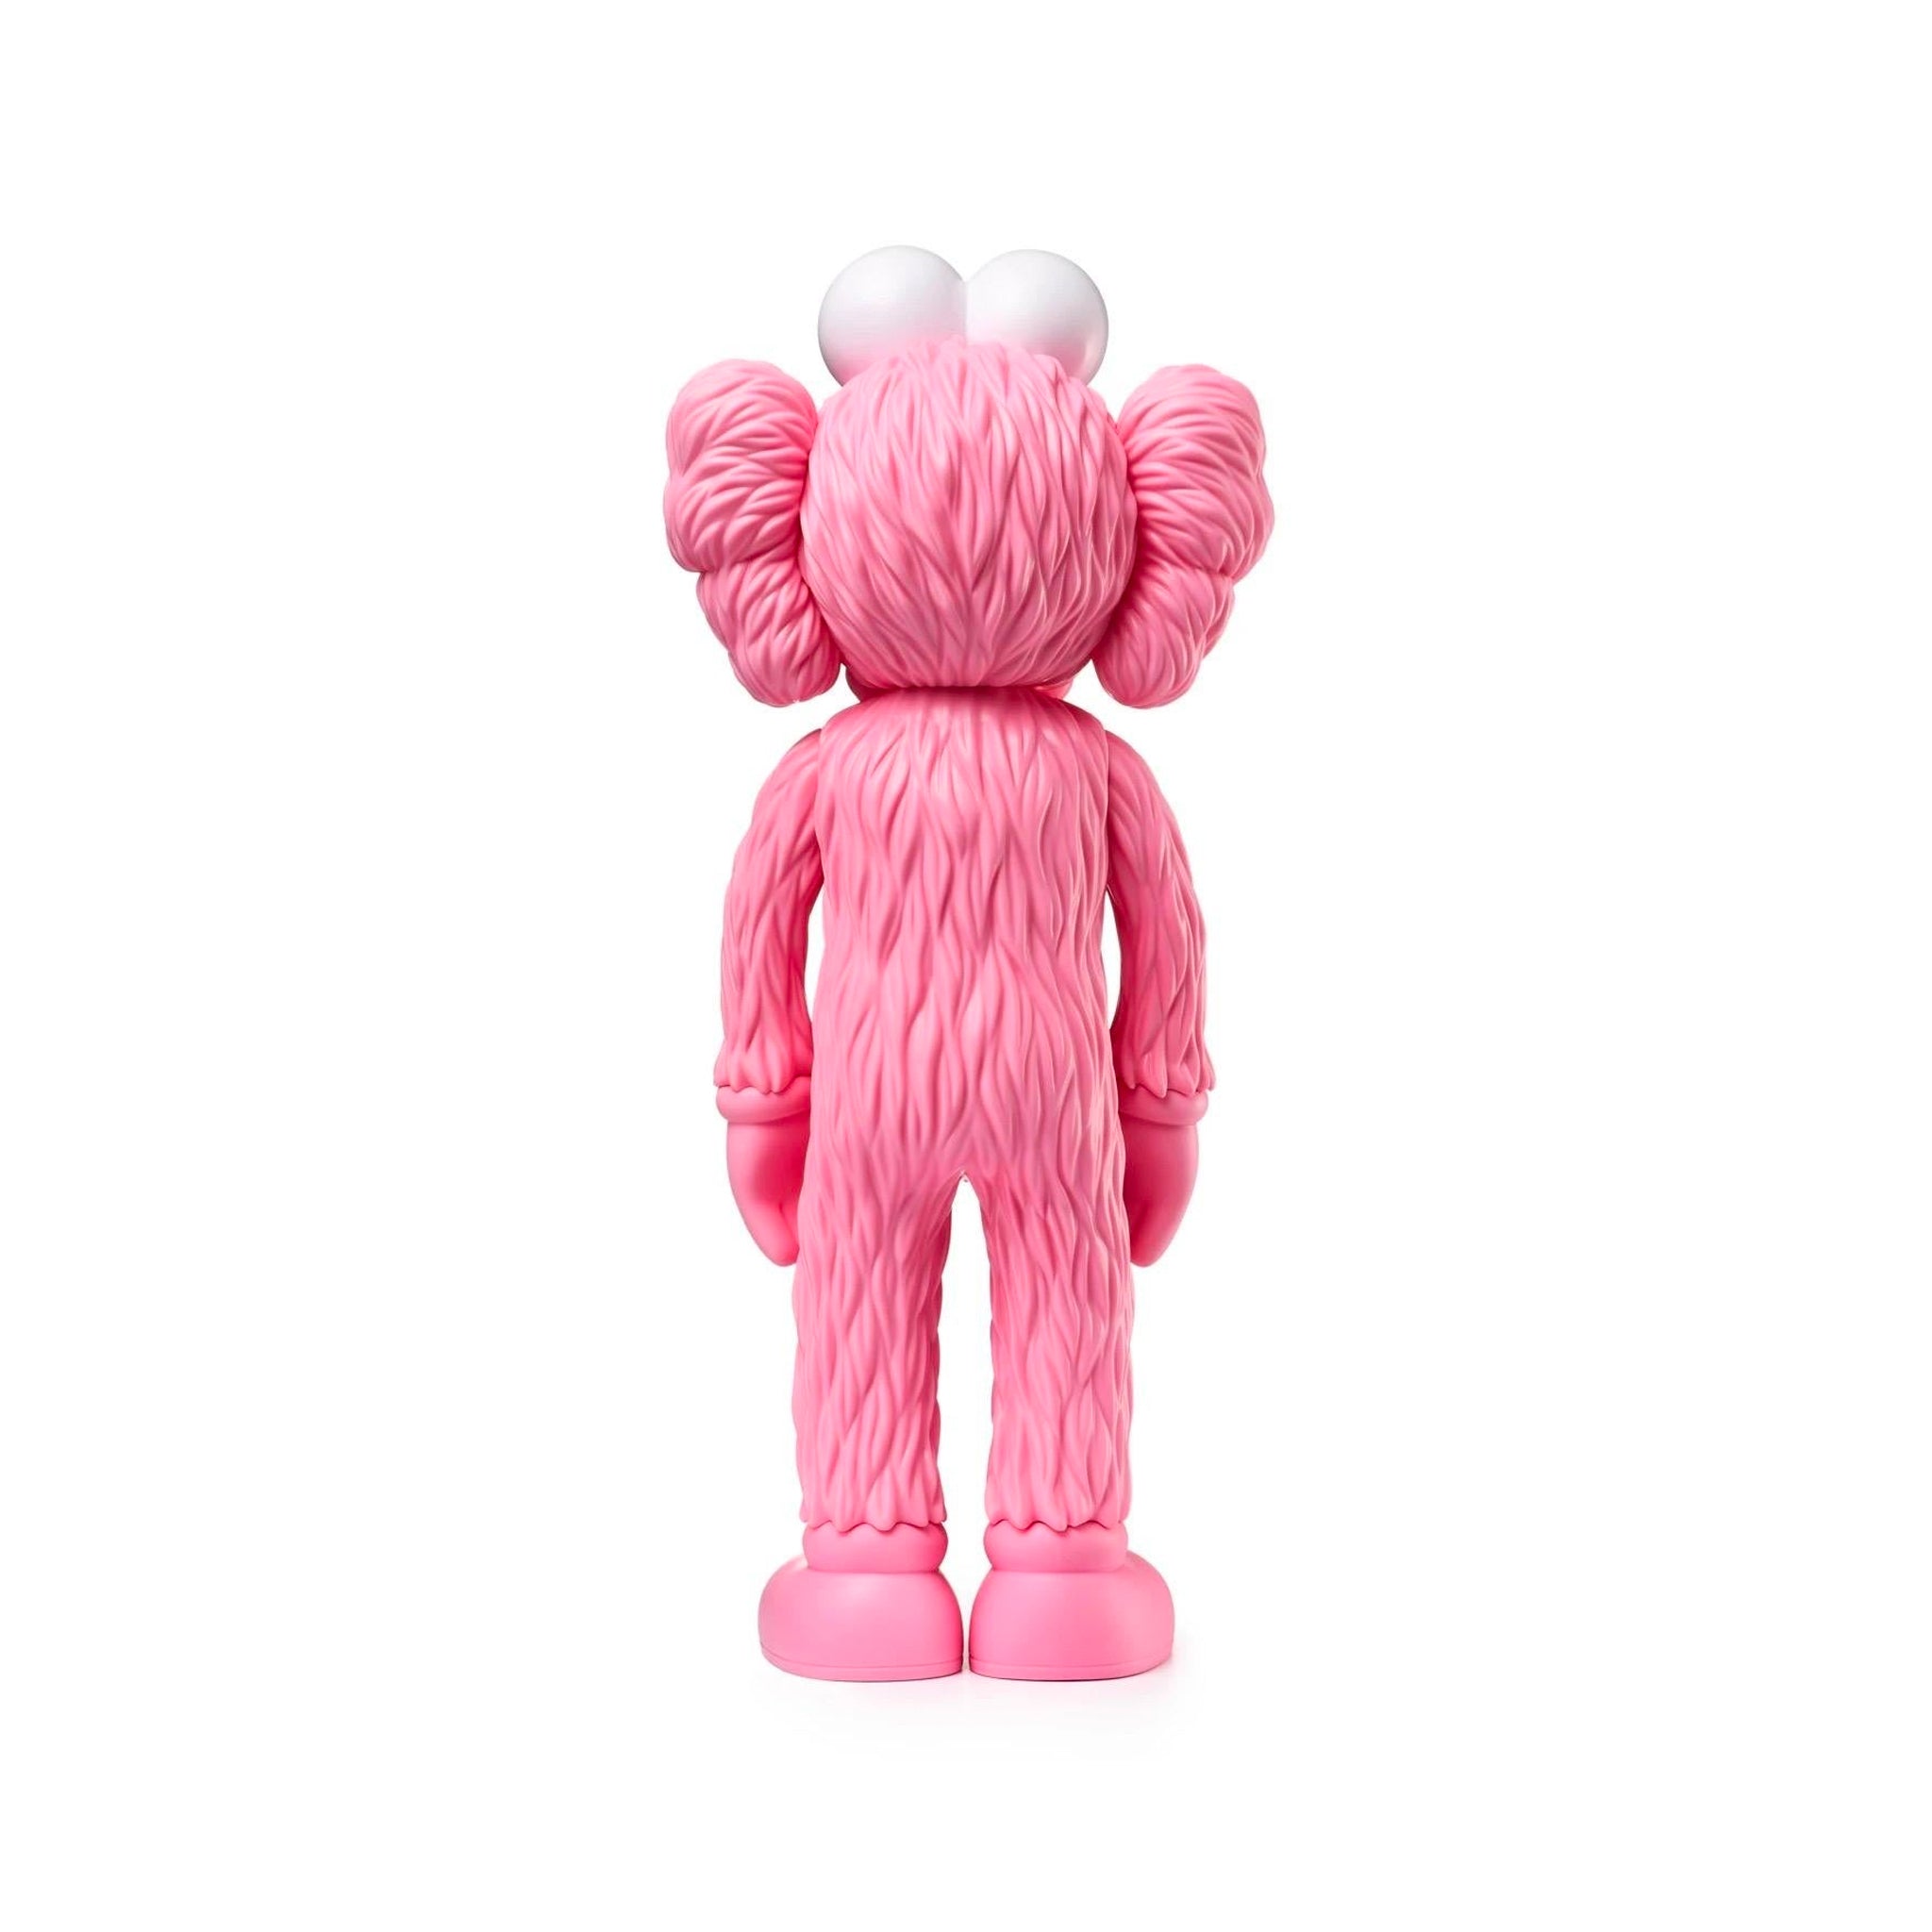 KAWS BFF OPEN EDITION PINK